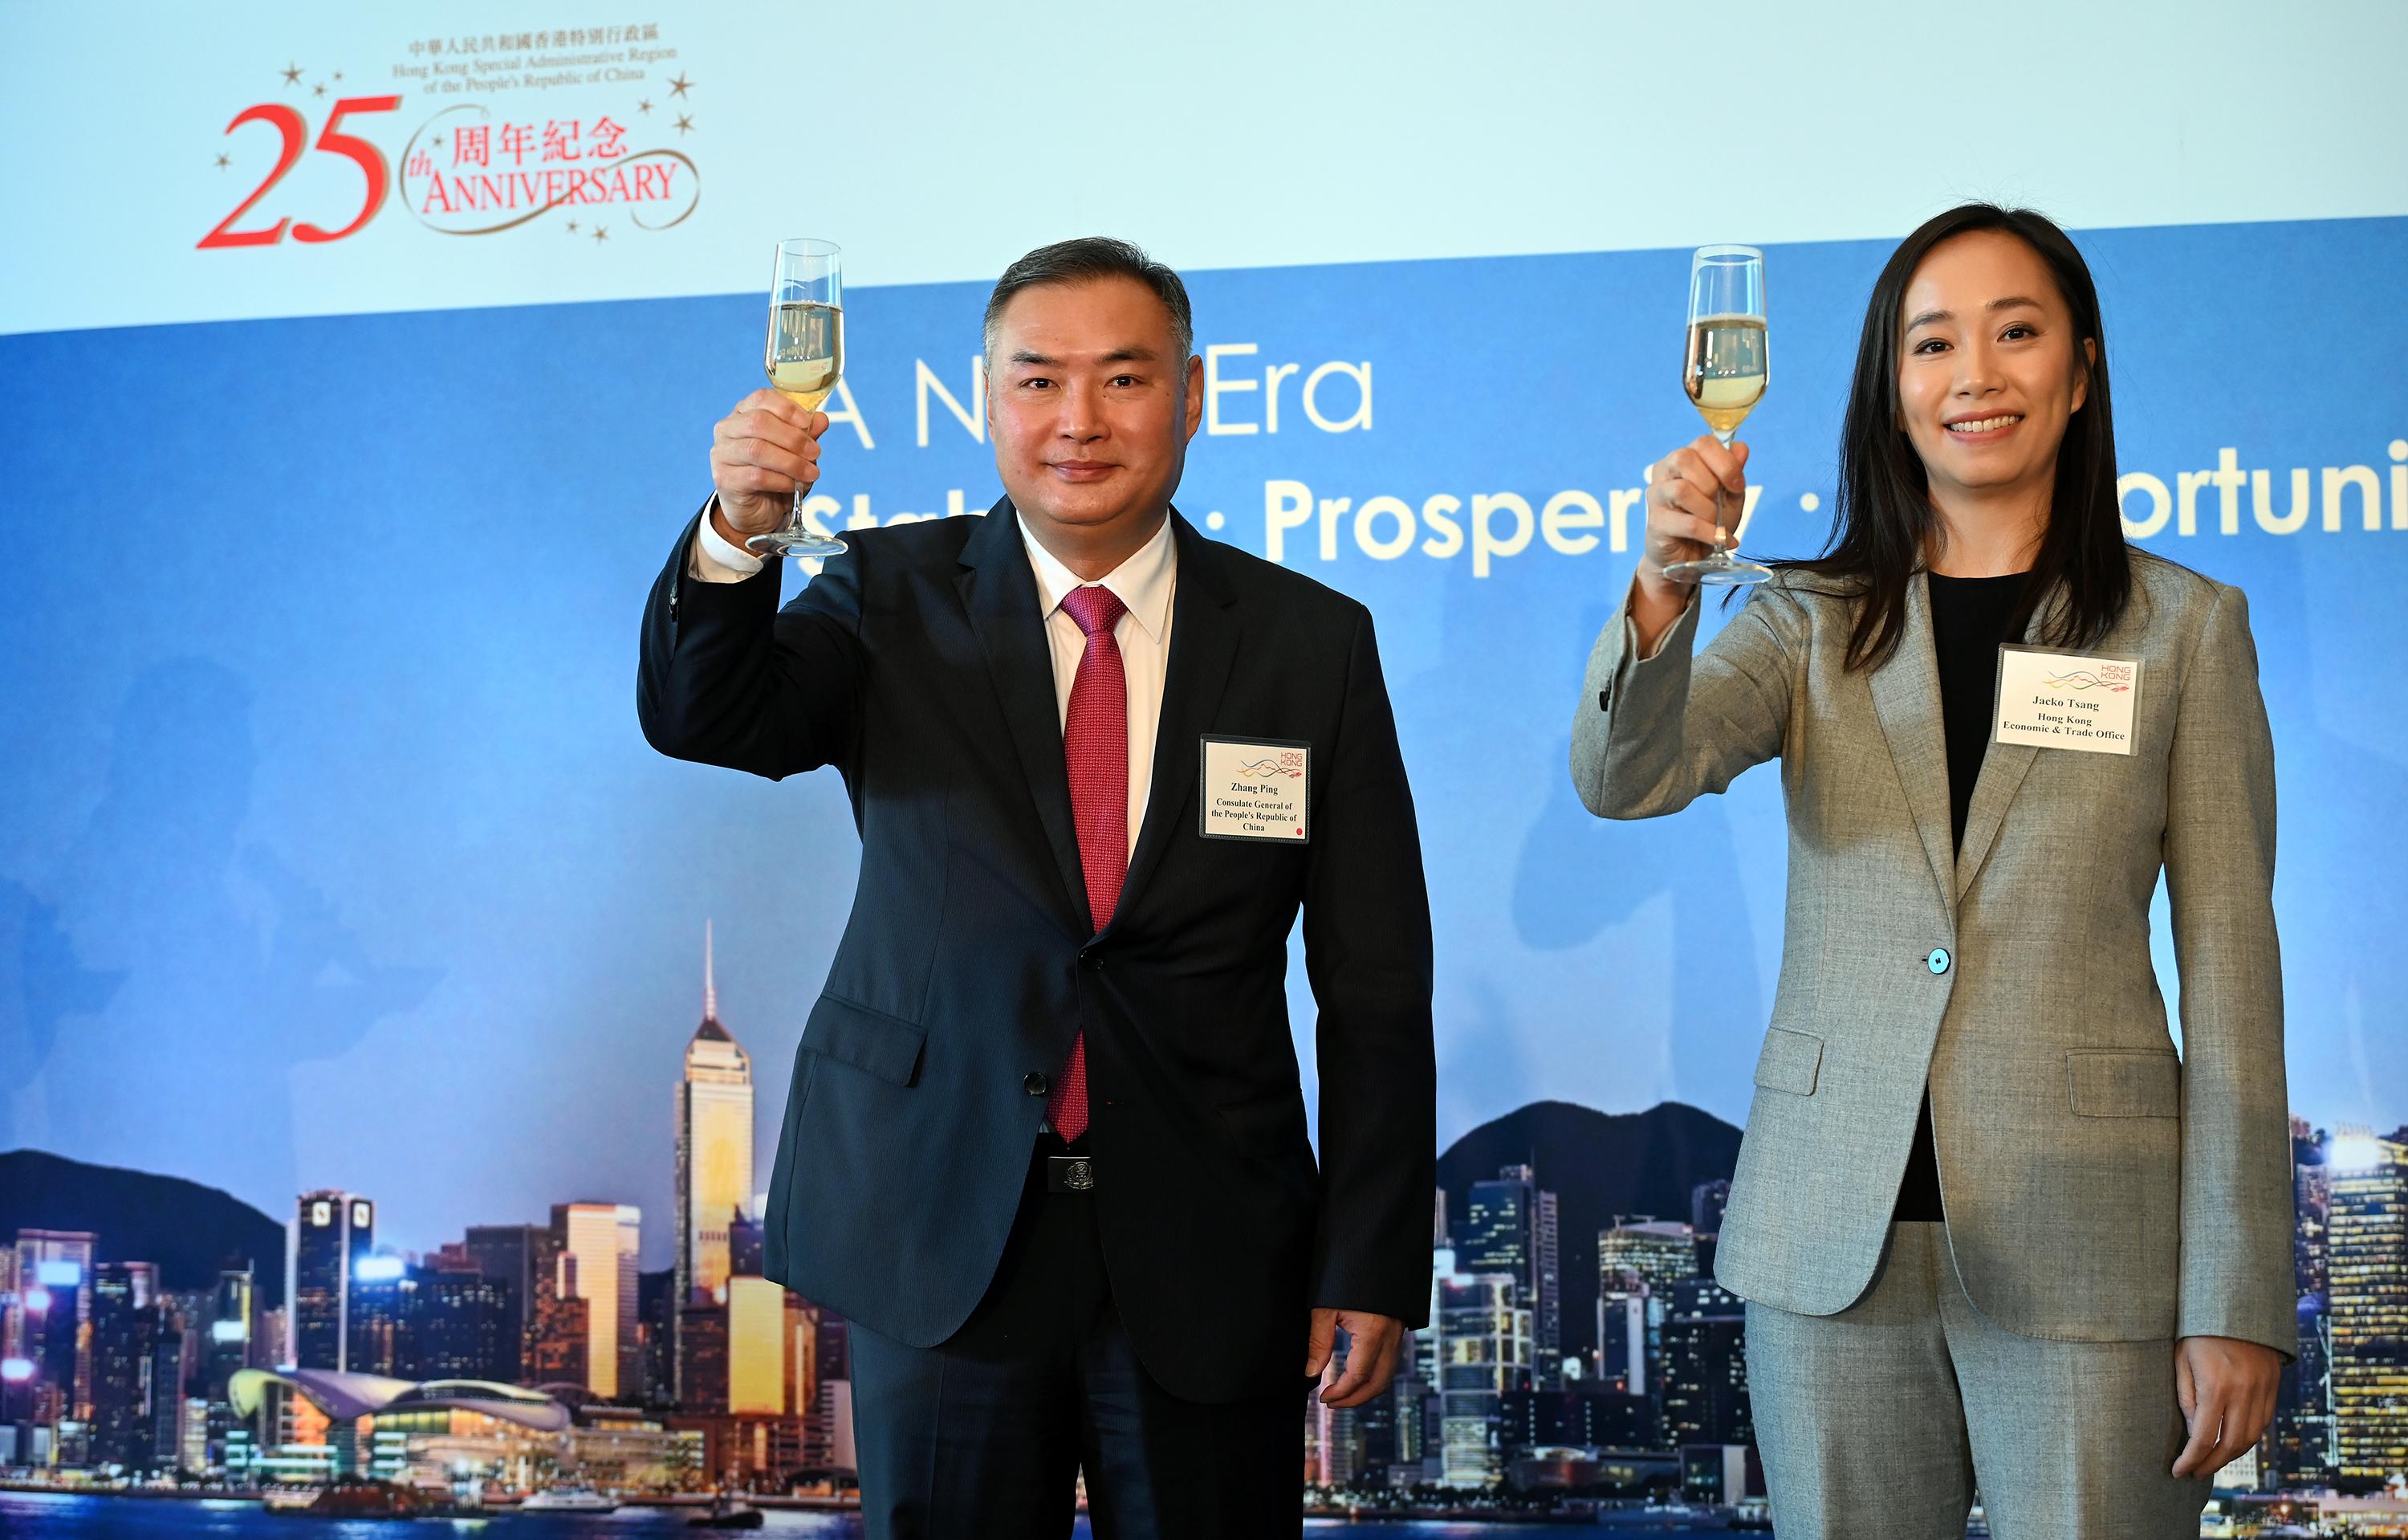 The Director of the Hong Kong Economic and Trade Office in San Francisco, Ms Jacko Tsang (right), and the Consul General of the People’s Republic of China in Los Angeles, Mr Zhang Ping (left), propose a toast at a business luncheon celebrating the 25th anniversary of the establishment of the Hong Kong Special Administrative Region. The event was held in Los Angeles, California, on October 26 (Los Angeles time).